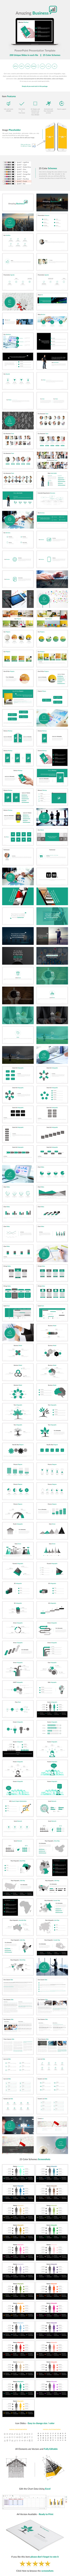 Amazing Business PowerPoint Presentation Template